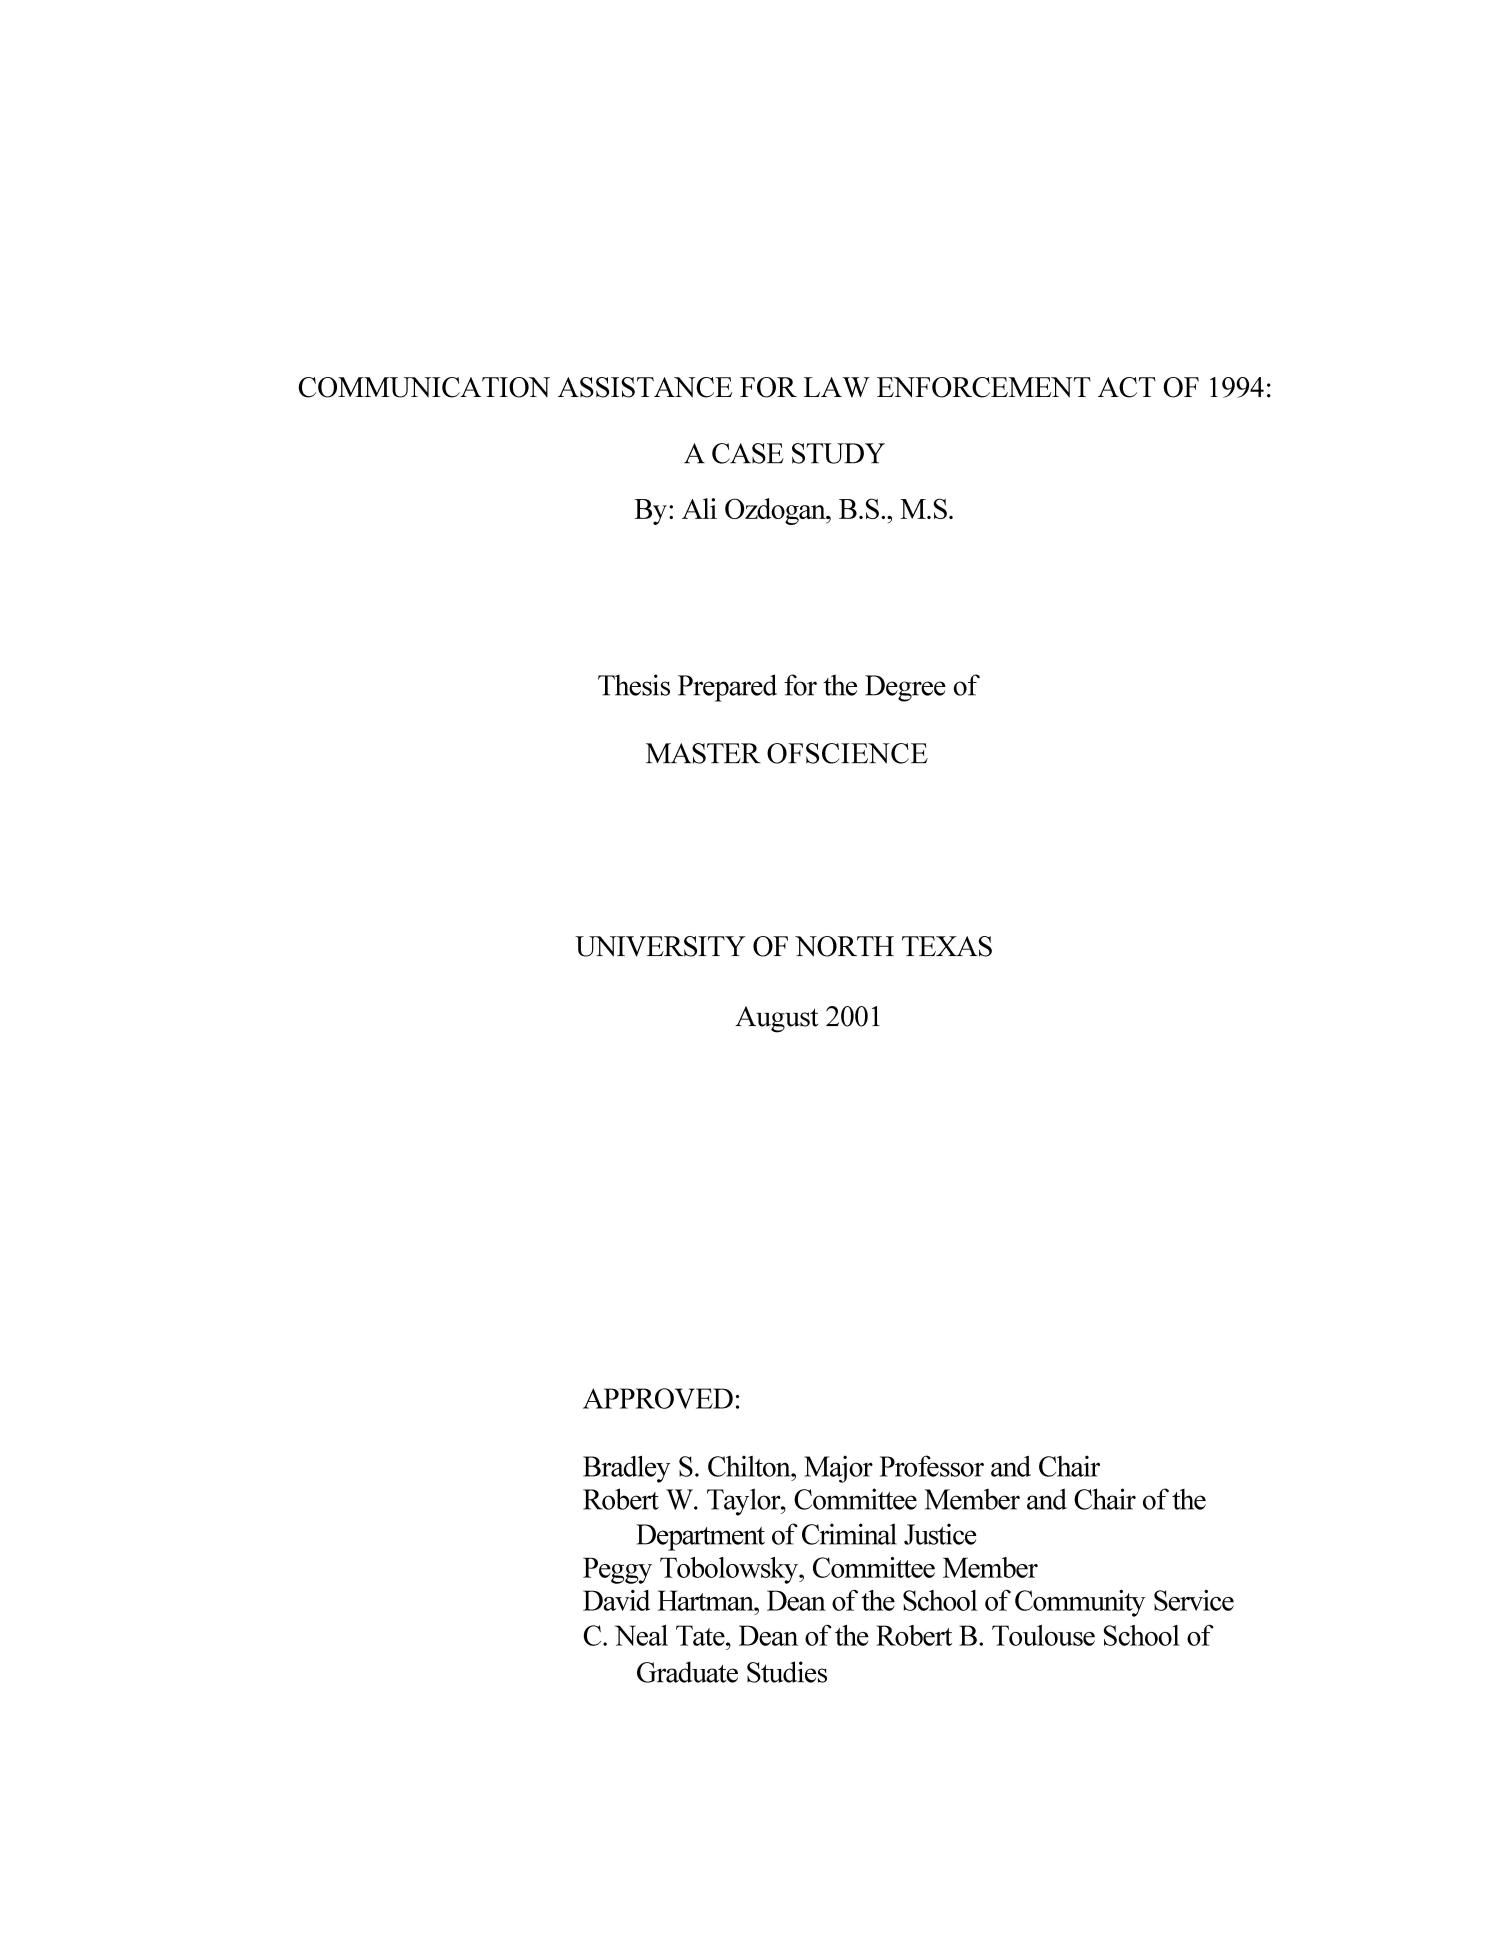 Communication Assistance for Law Enforcement Act of 1994: A Case Study
                                                
                                                    Title Page
                                                